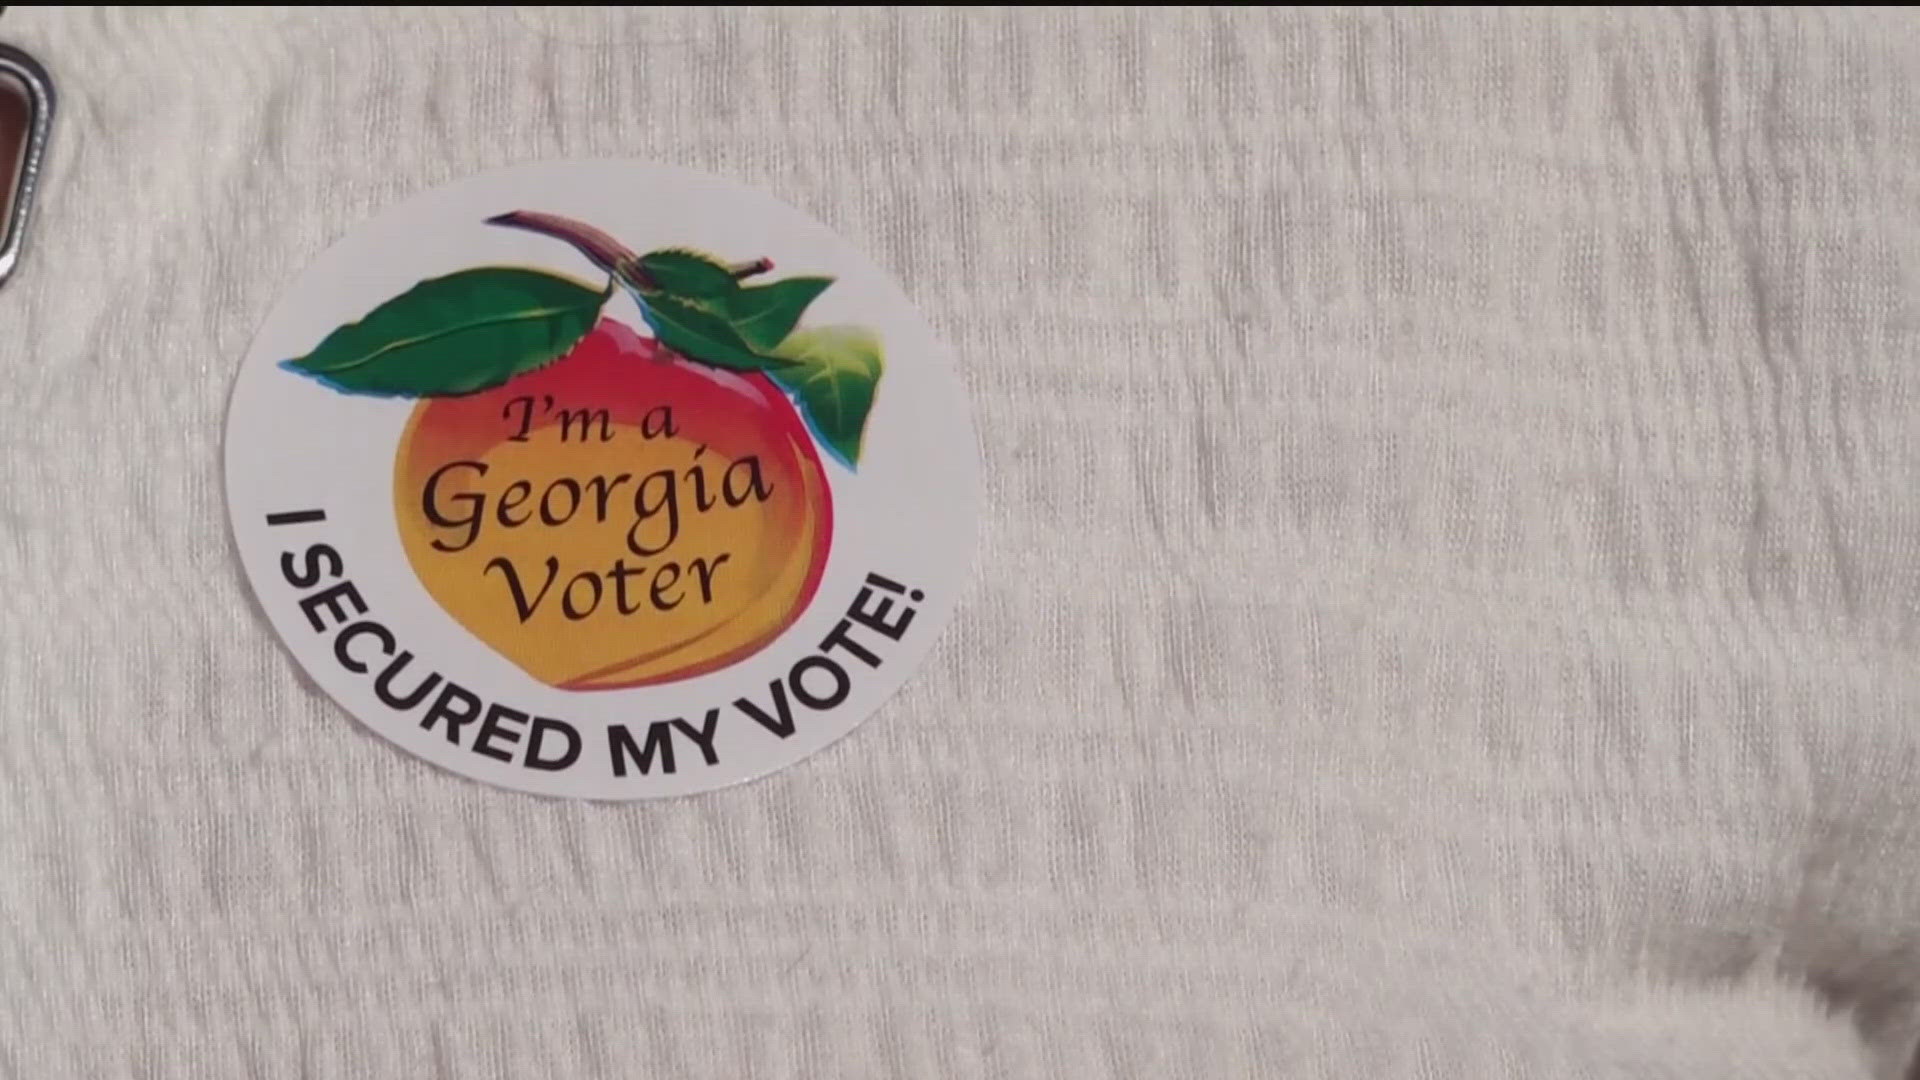 The May primary election includes races for the U.S. Congress, Georgia Senate and Georgia House of Representatives. It also includes local races.